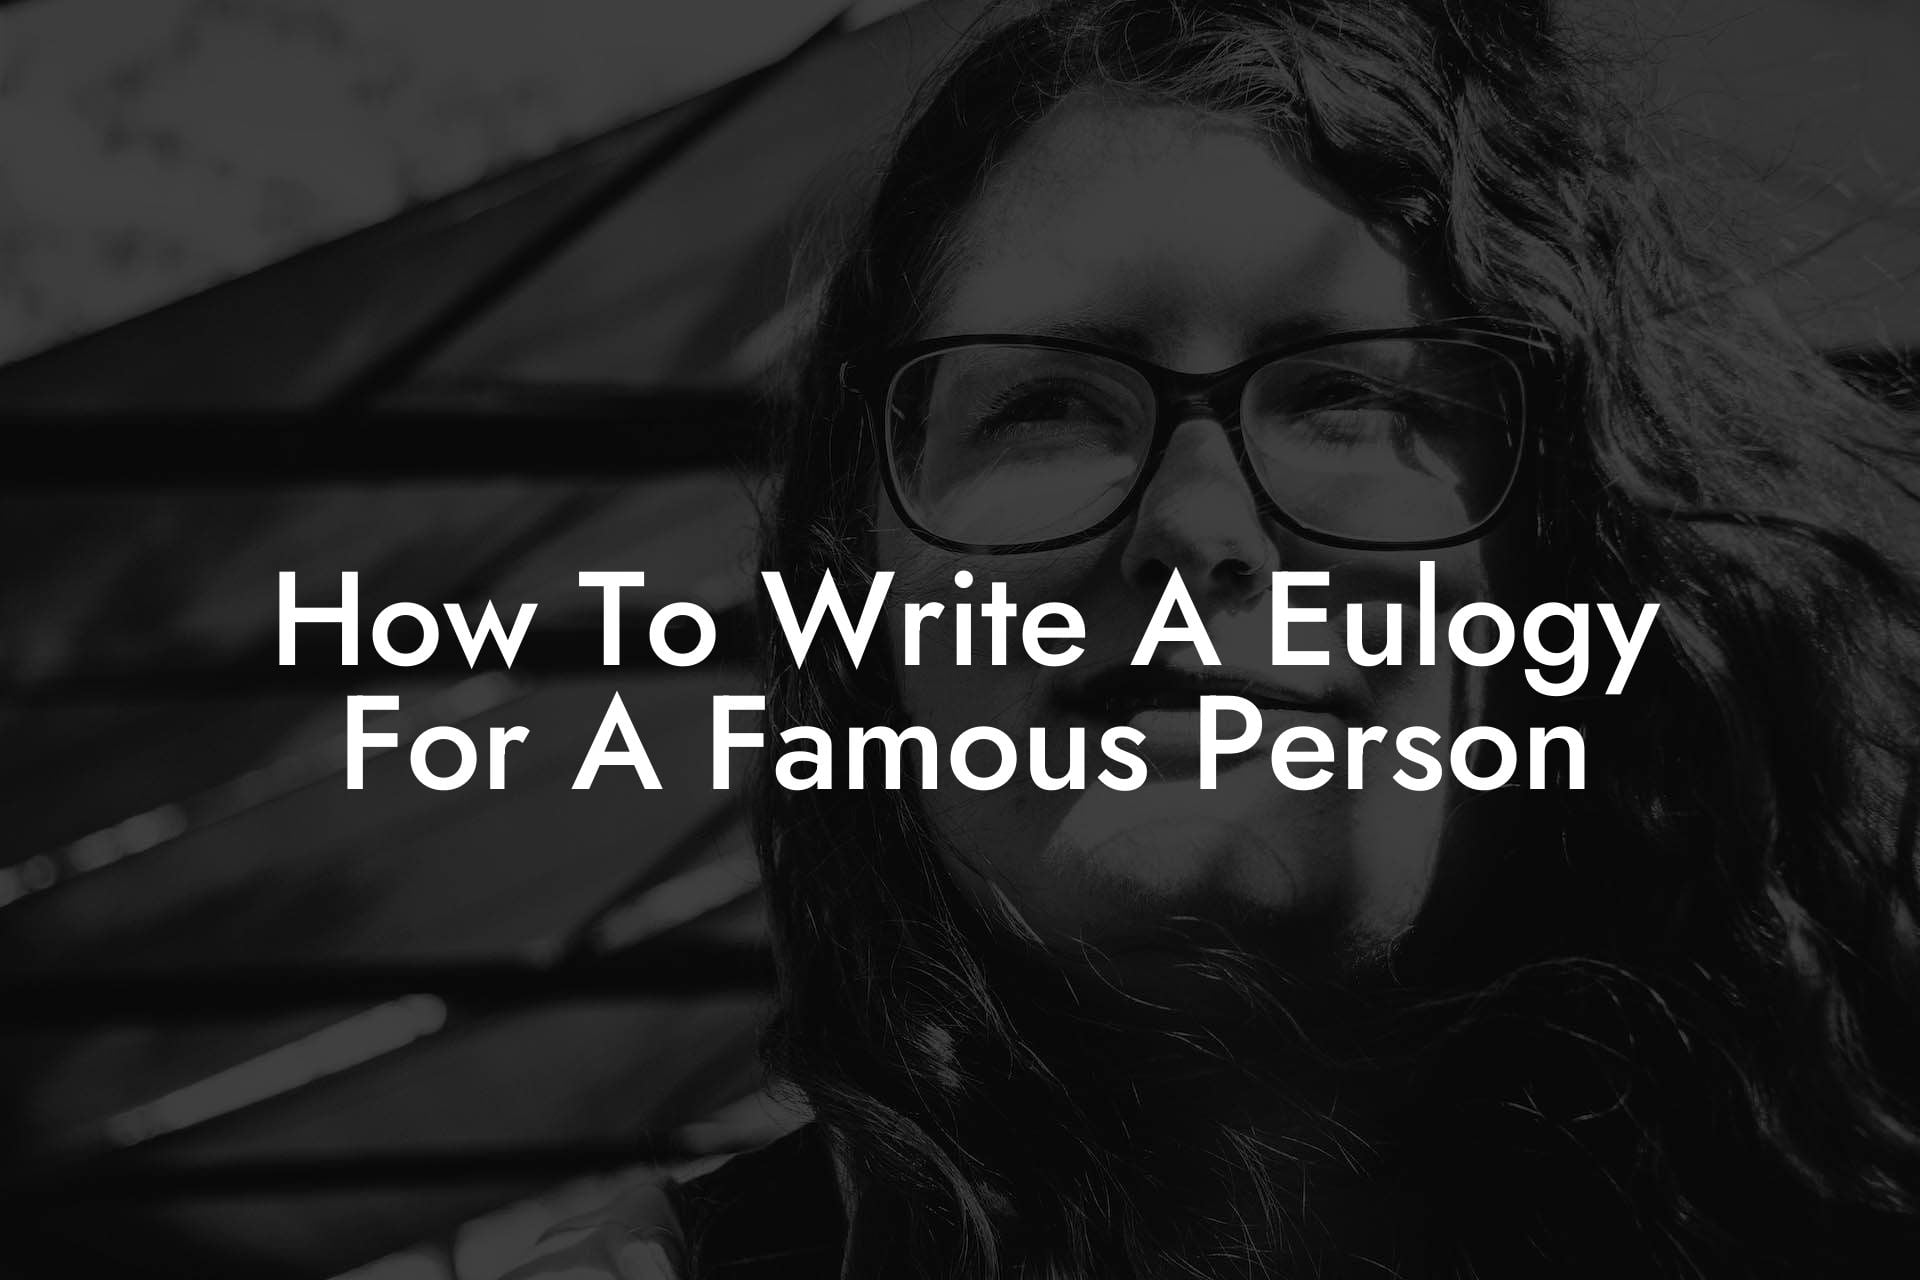 How To Write A Eulogy For A Famous Person